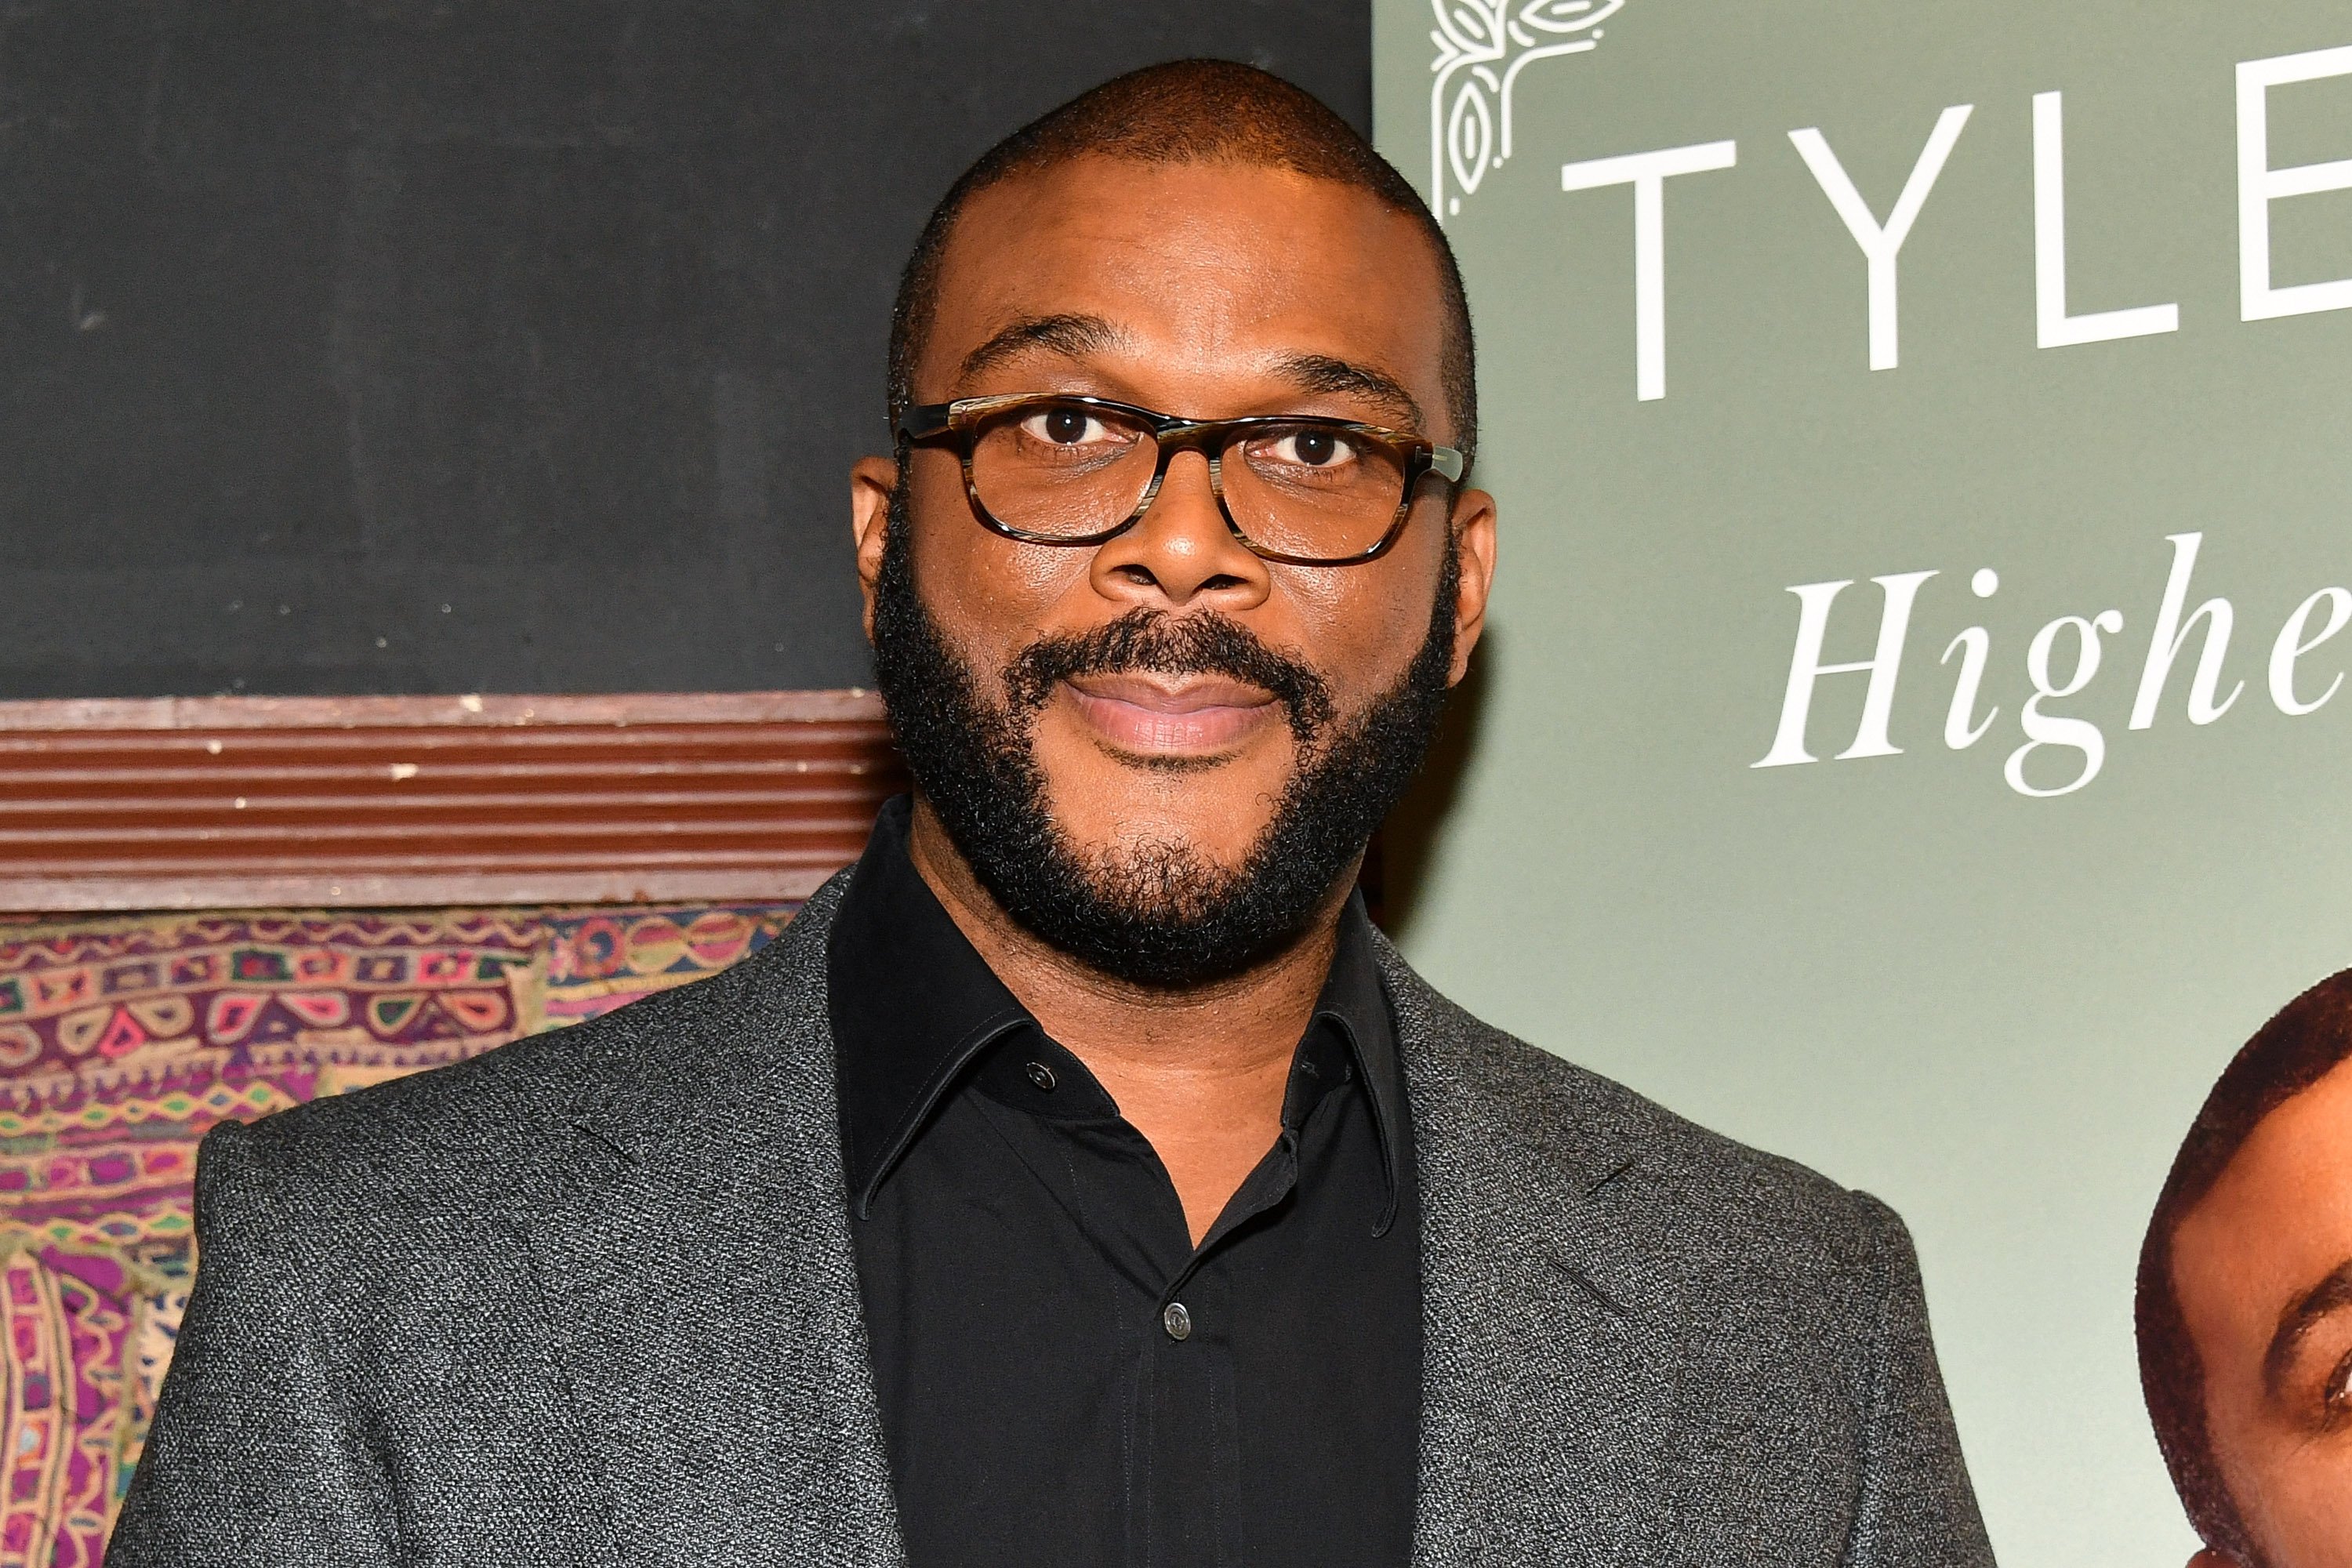 Tyler Perry launches his new book "Higher Is Waiting" at the Gramercy Theatre on November 14, 2017. | Source: Getty Images